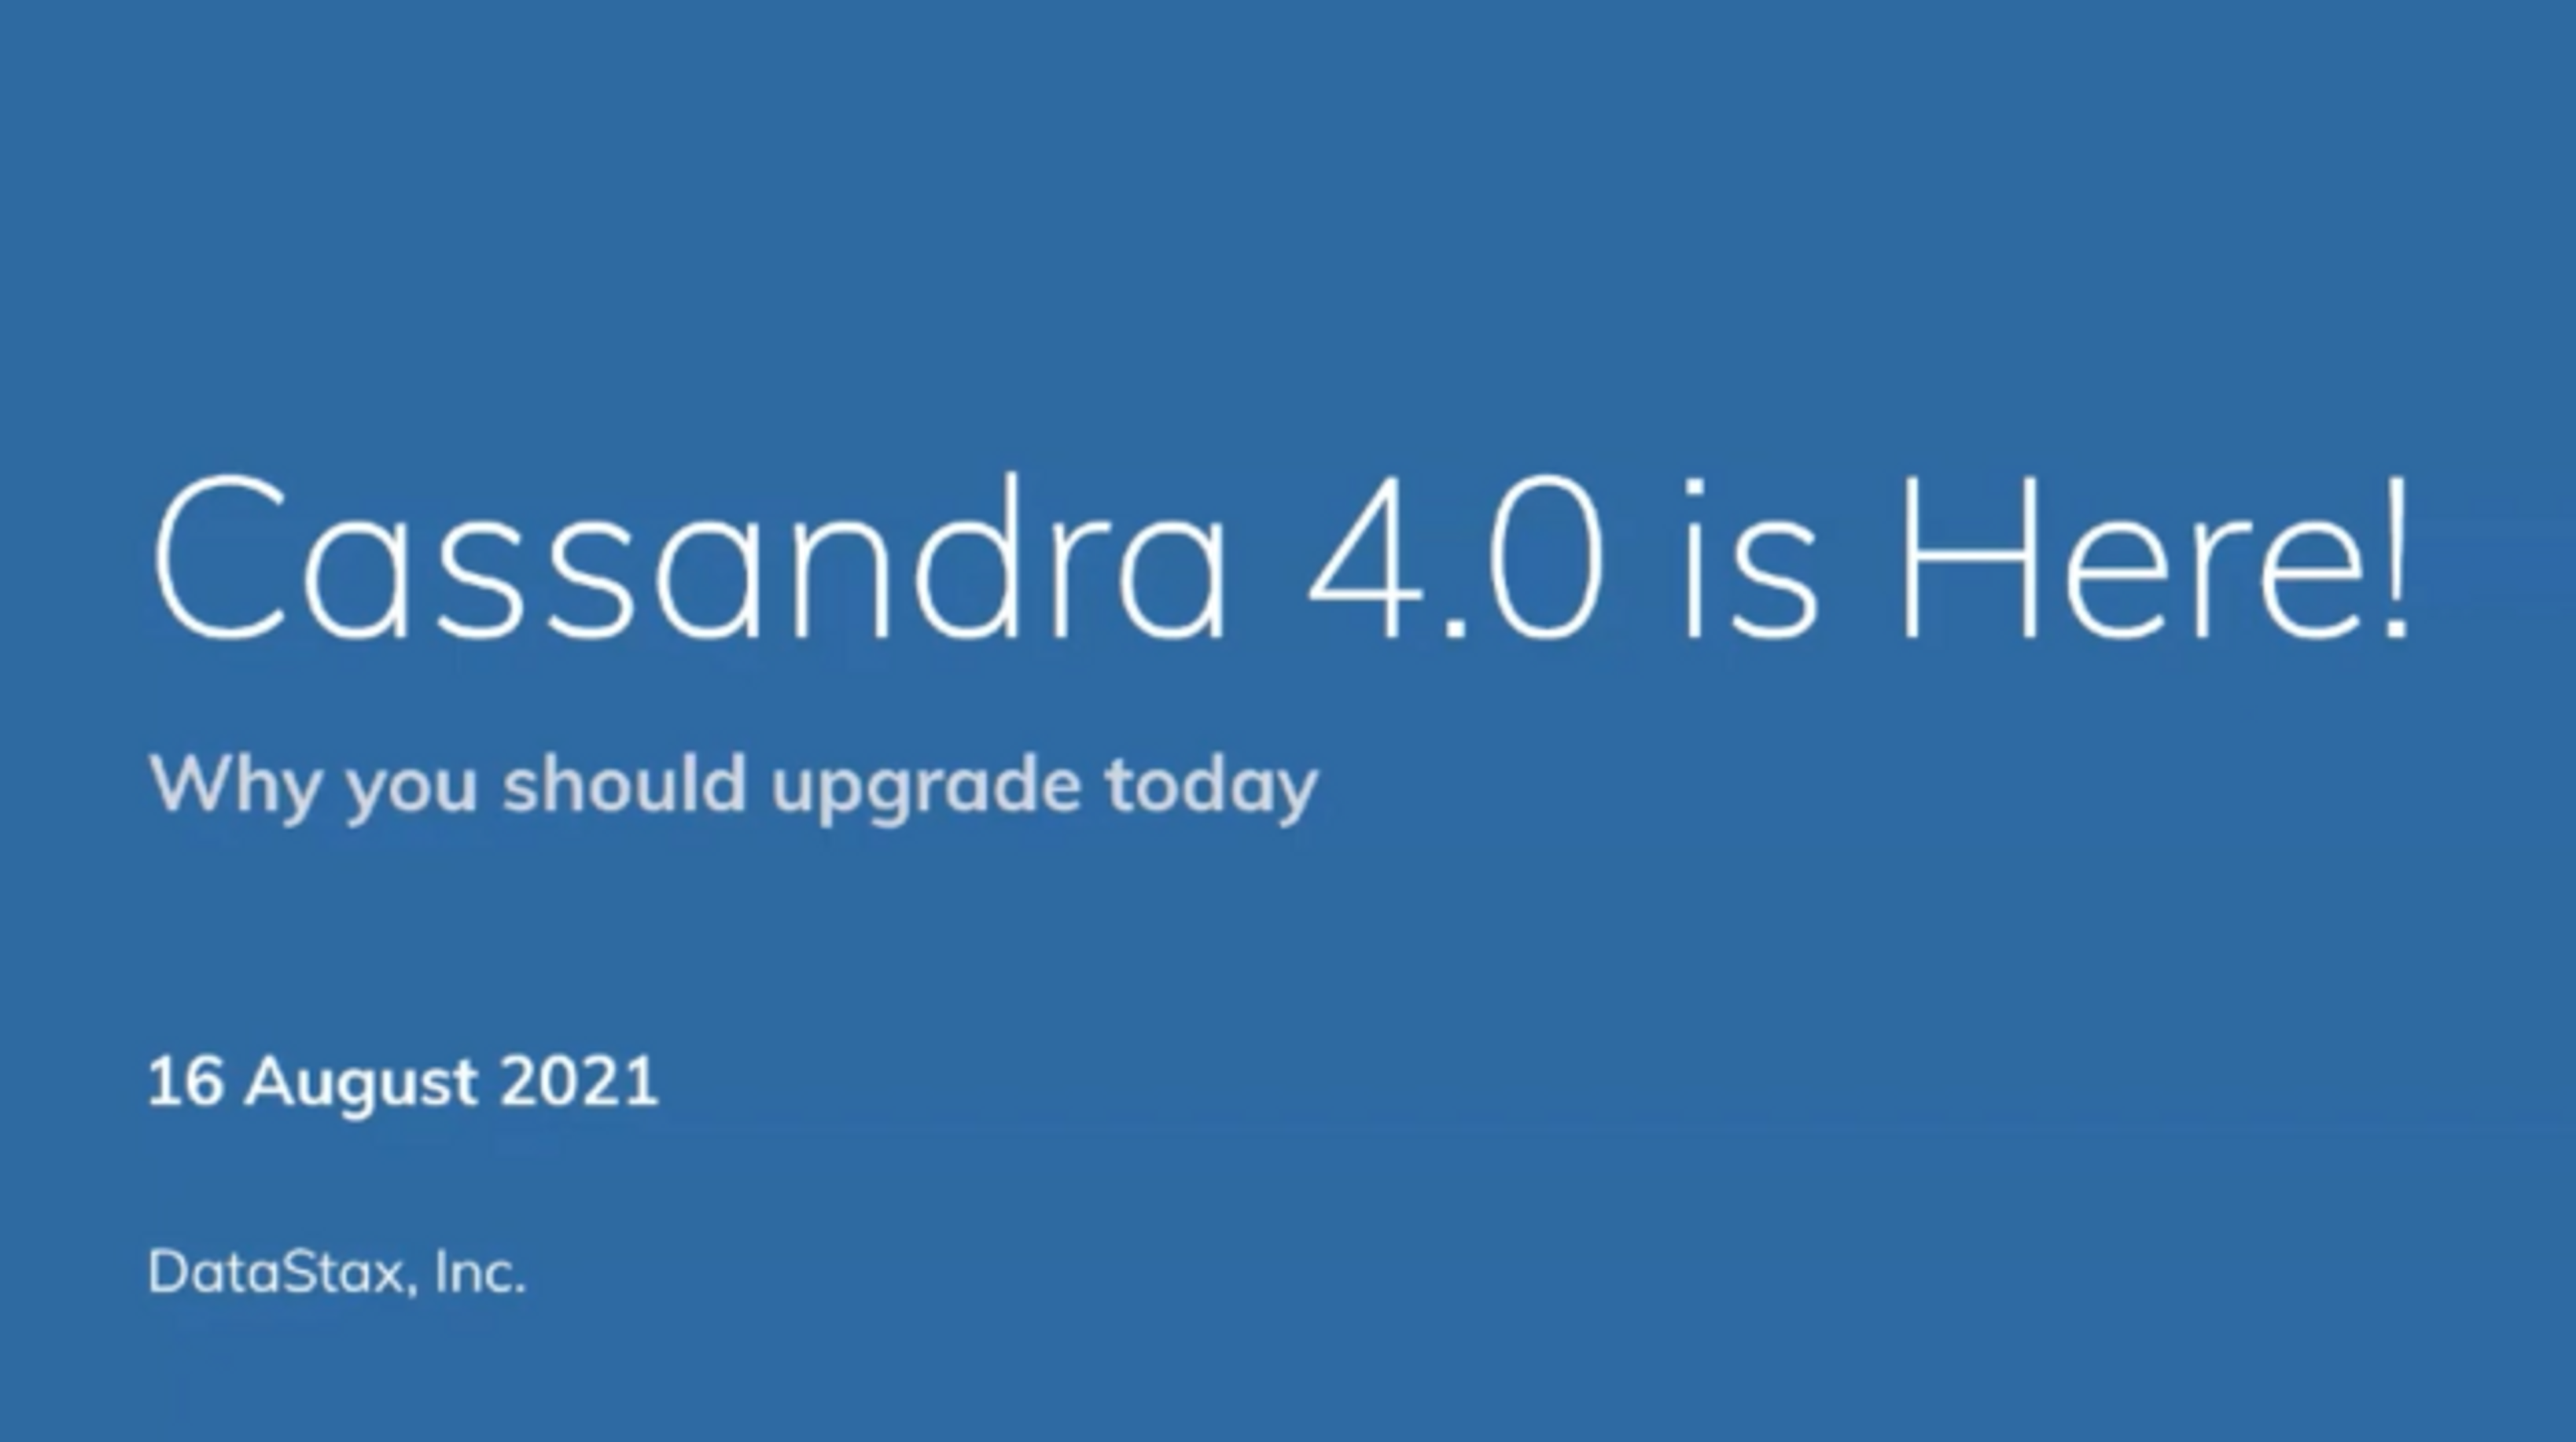 Cassandra 4.0 is Here! Why you should upgrade today